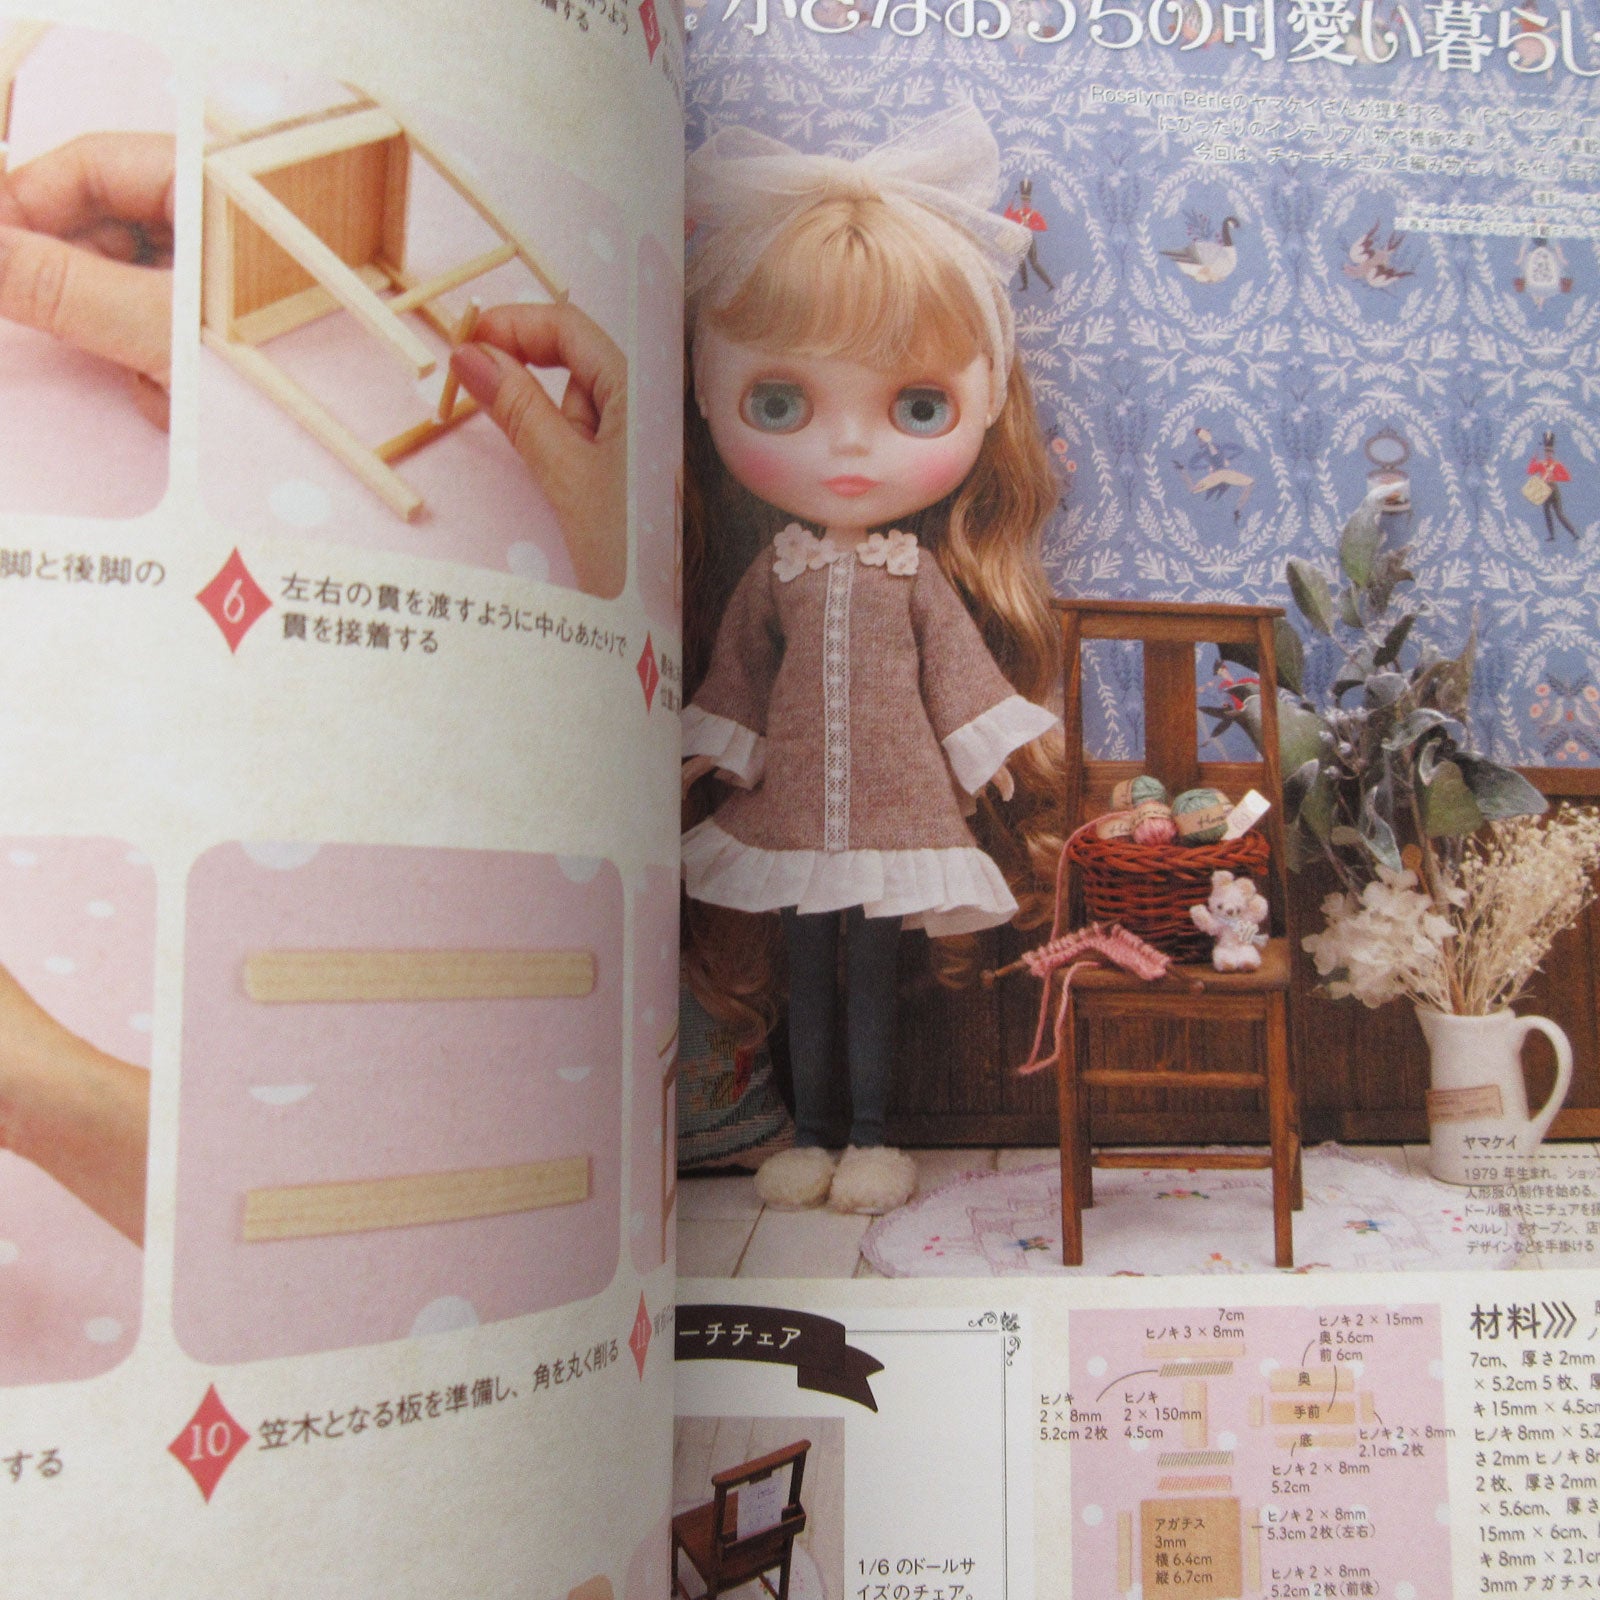 Sewing Books Patterns, Book Sewing Blyth Doll